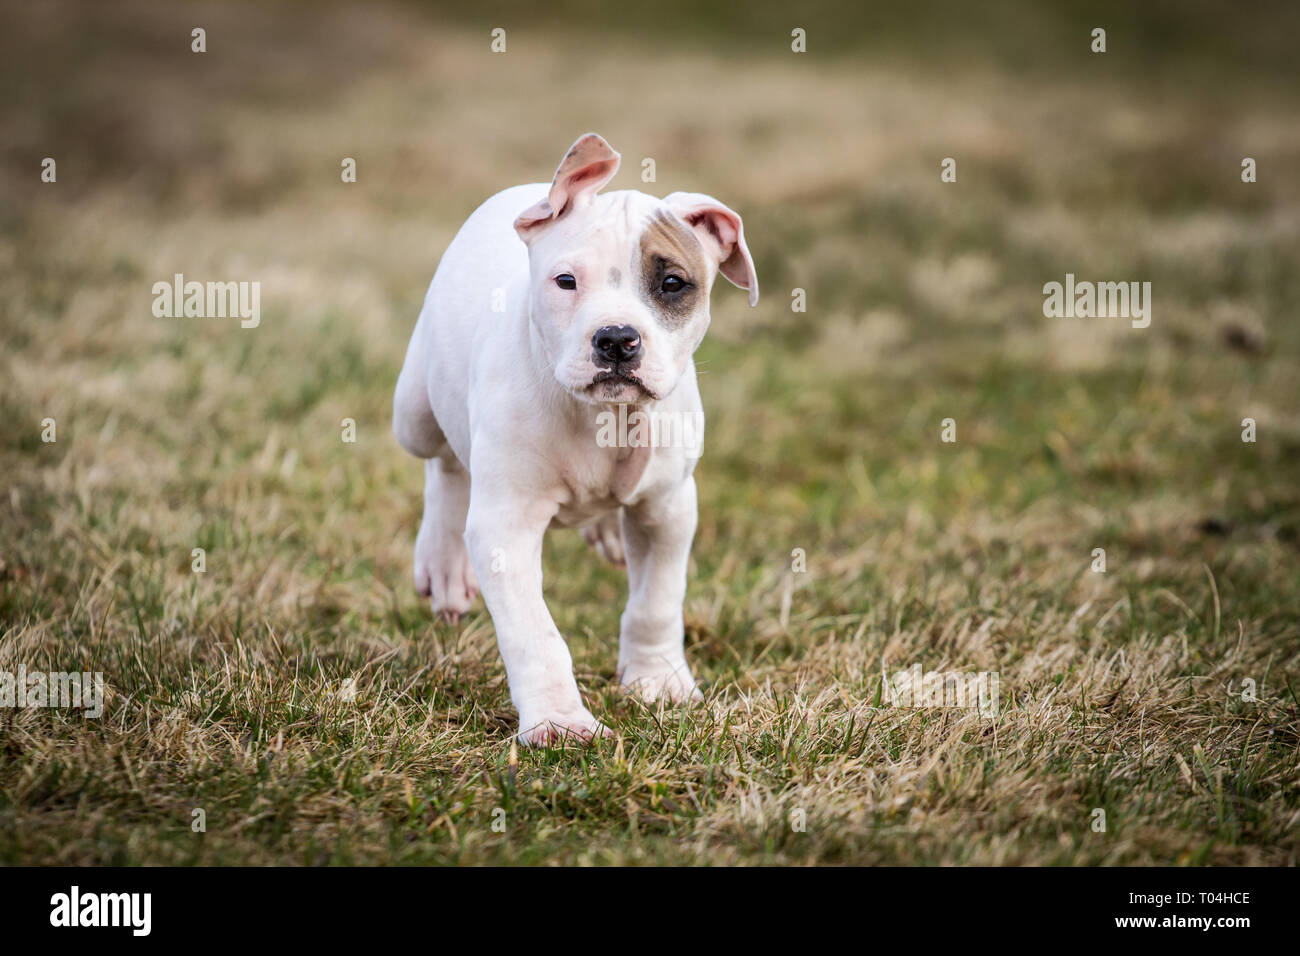 fawn and white pitbull puppies